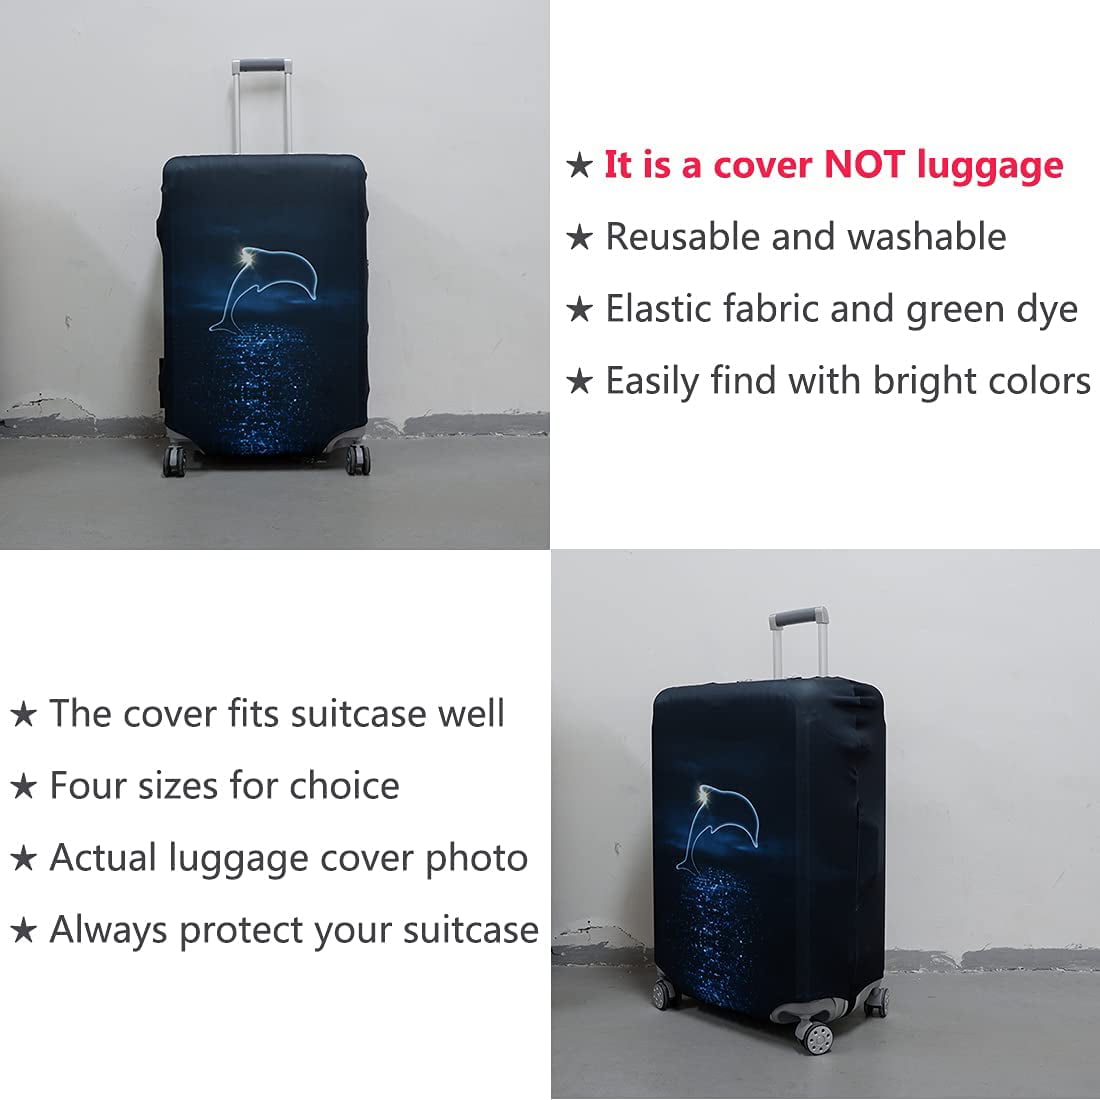 L Travelkin Luggage Cover Washable Suitcase Protector Anti-scratch Suitcase cover Fits 18-32 Inch Luggage